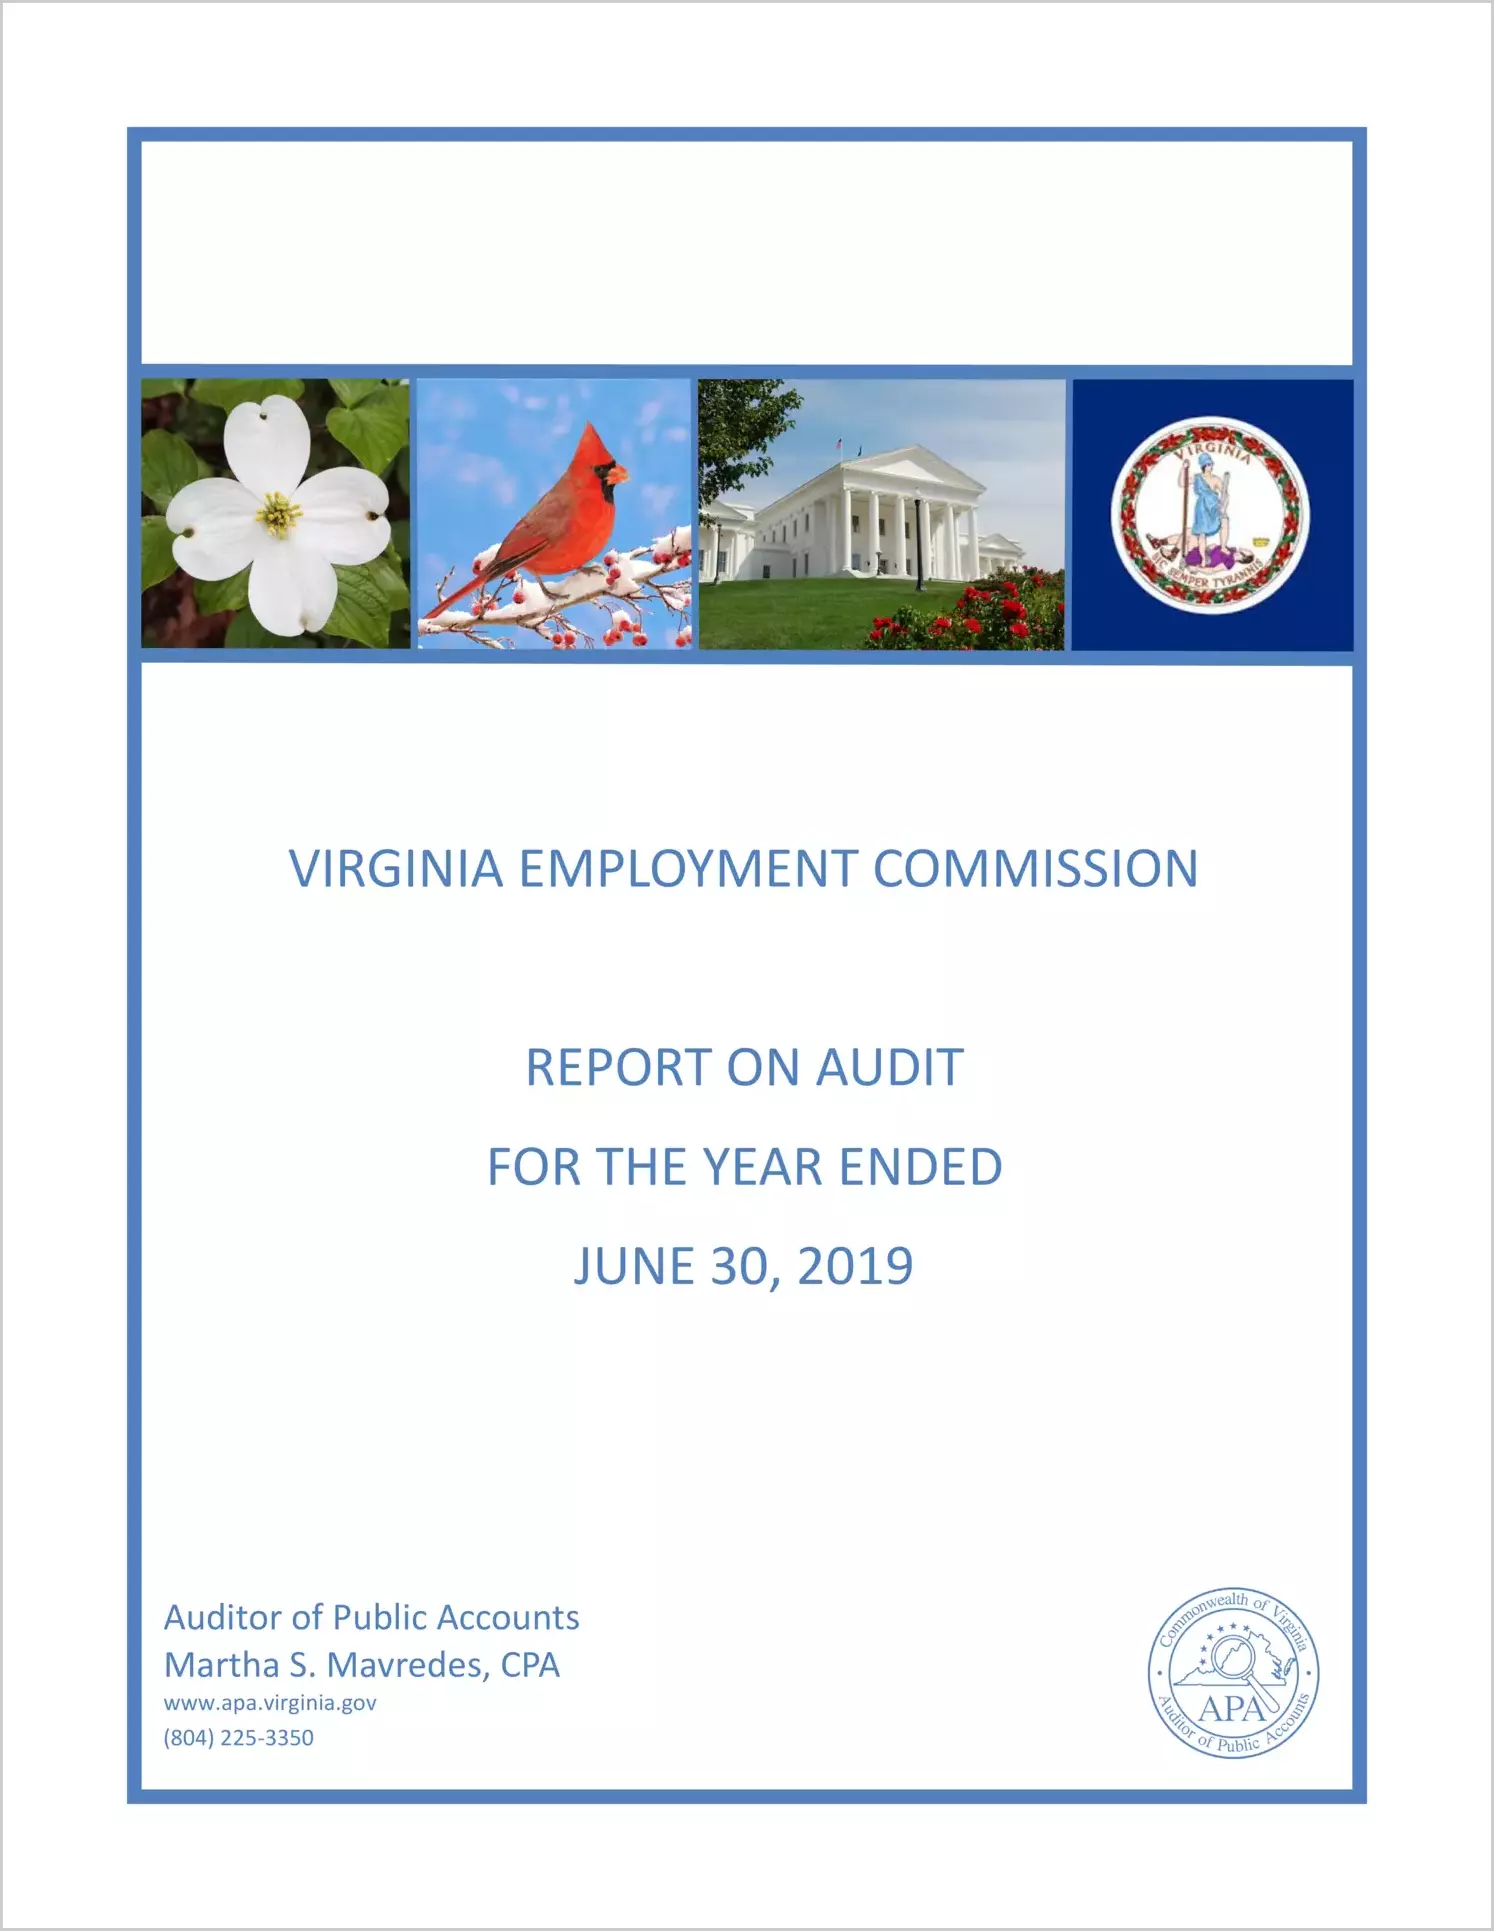 Virginia Employment Commission for the year ended June 30, 2019